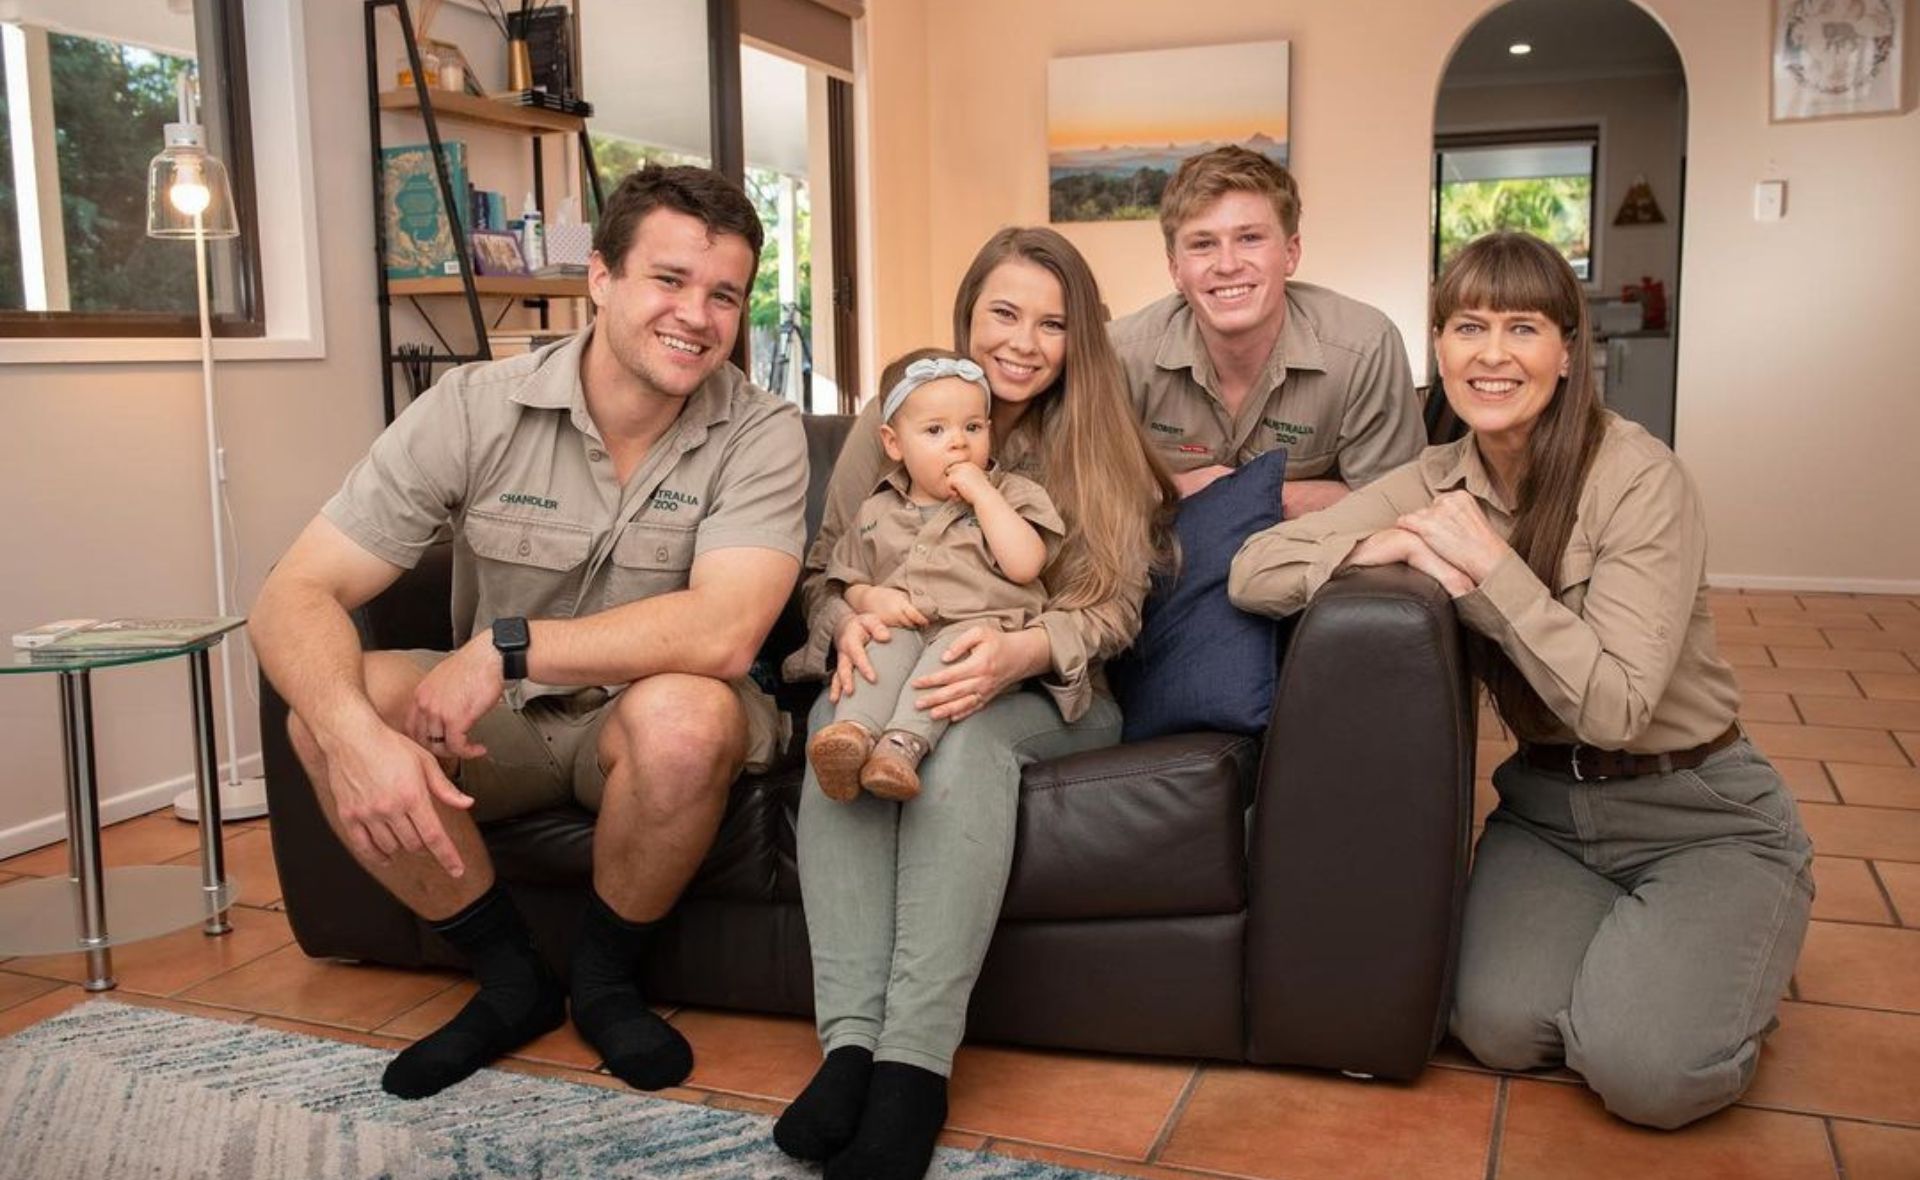 Family bond doesn’t lie too deep as Bindi Irwin’s daughter, Grace doesn’t know her great-grandfather